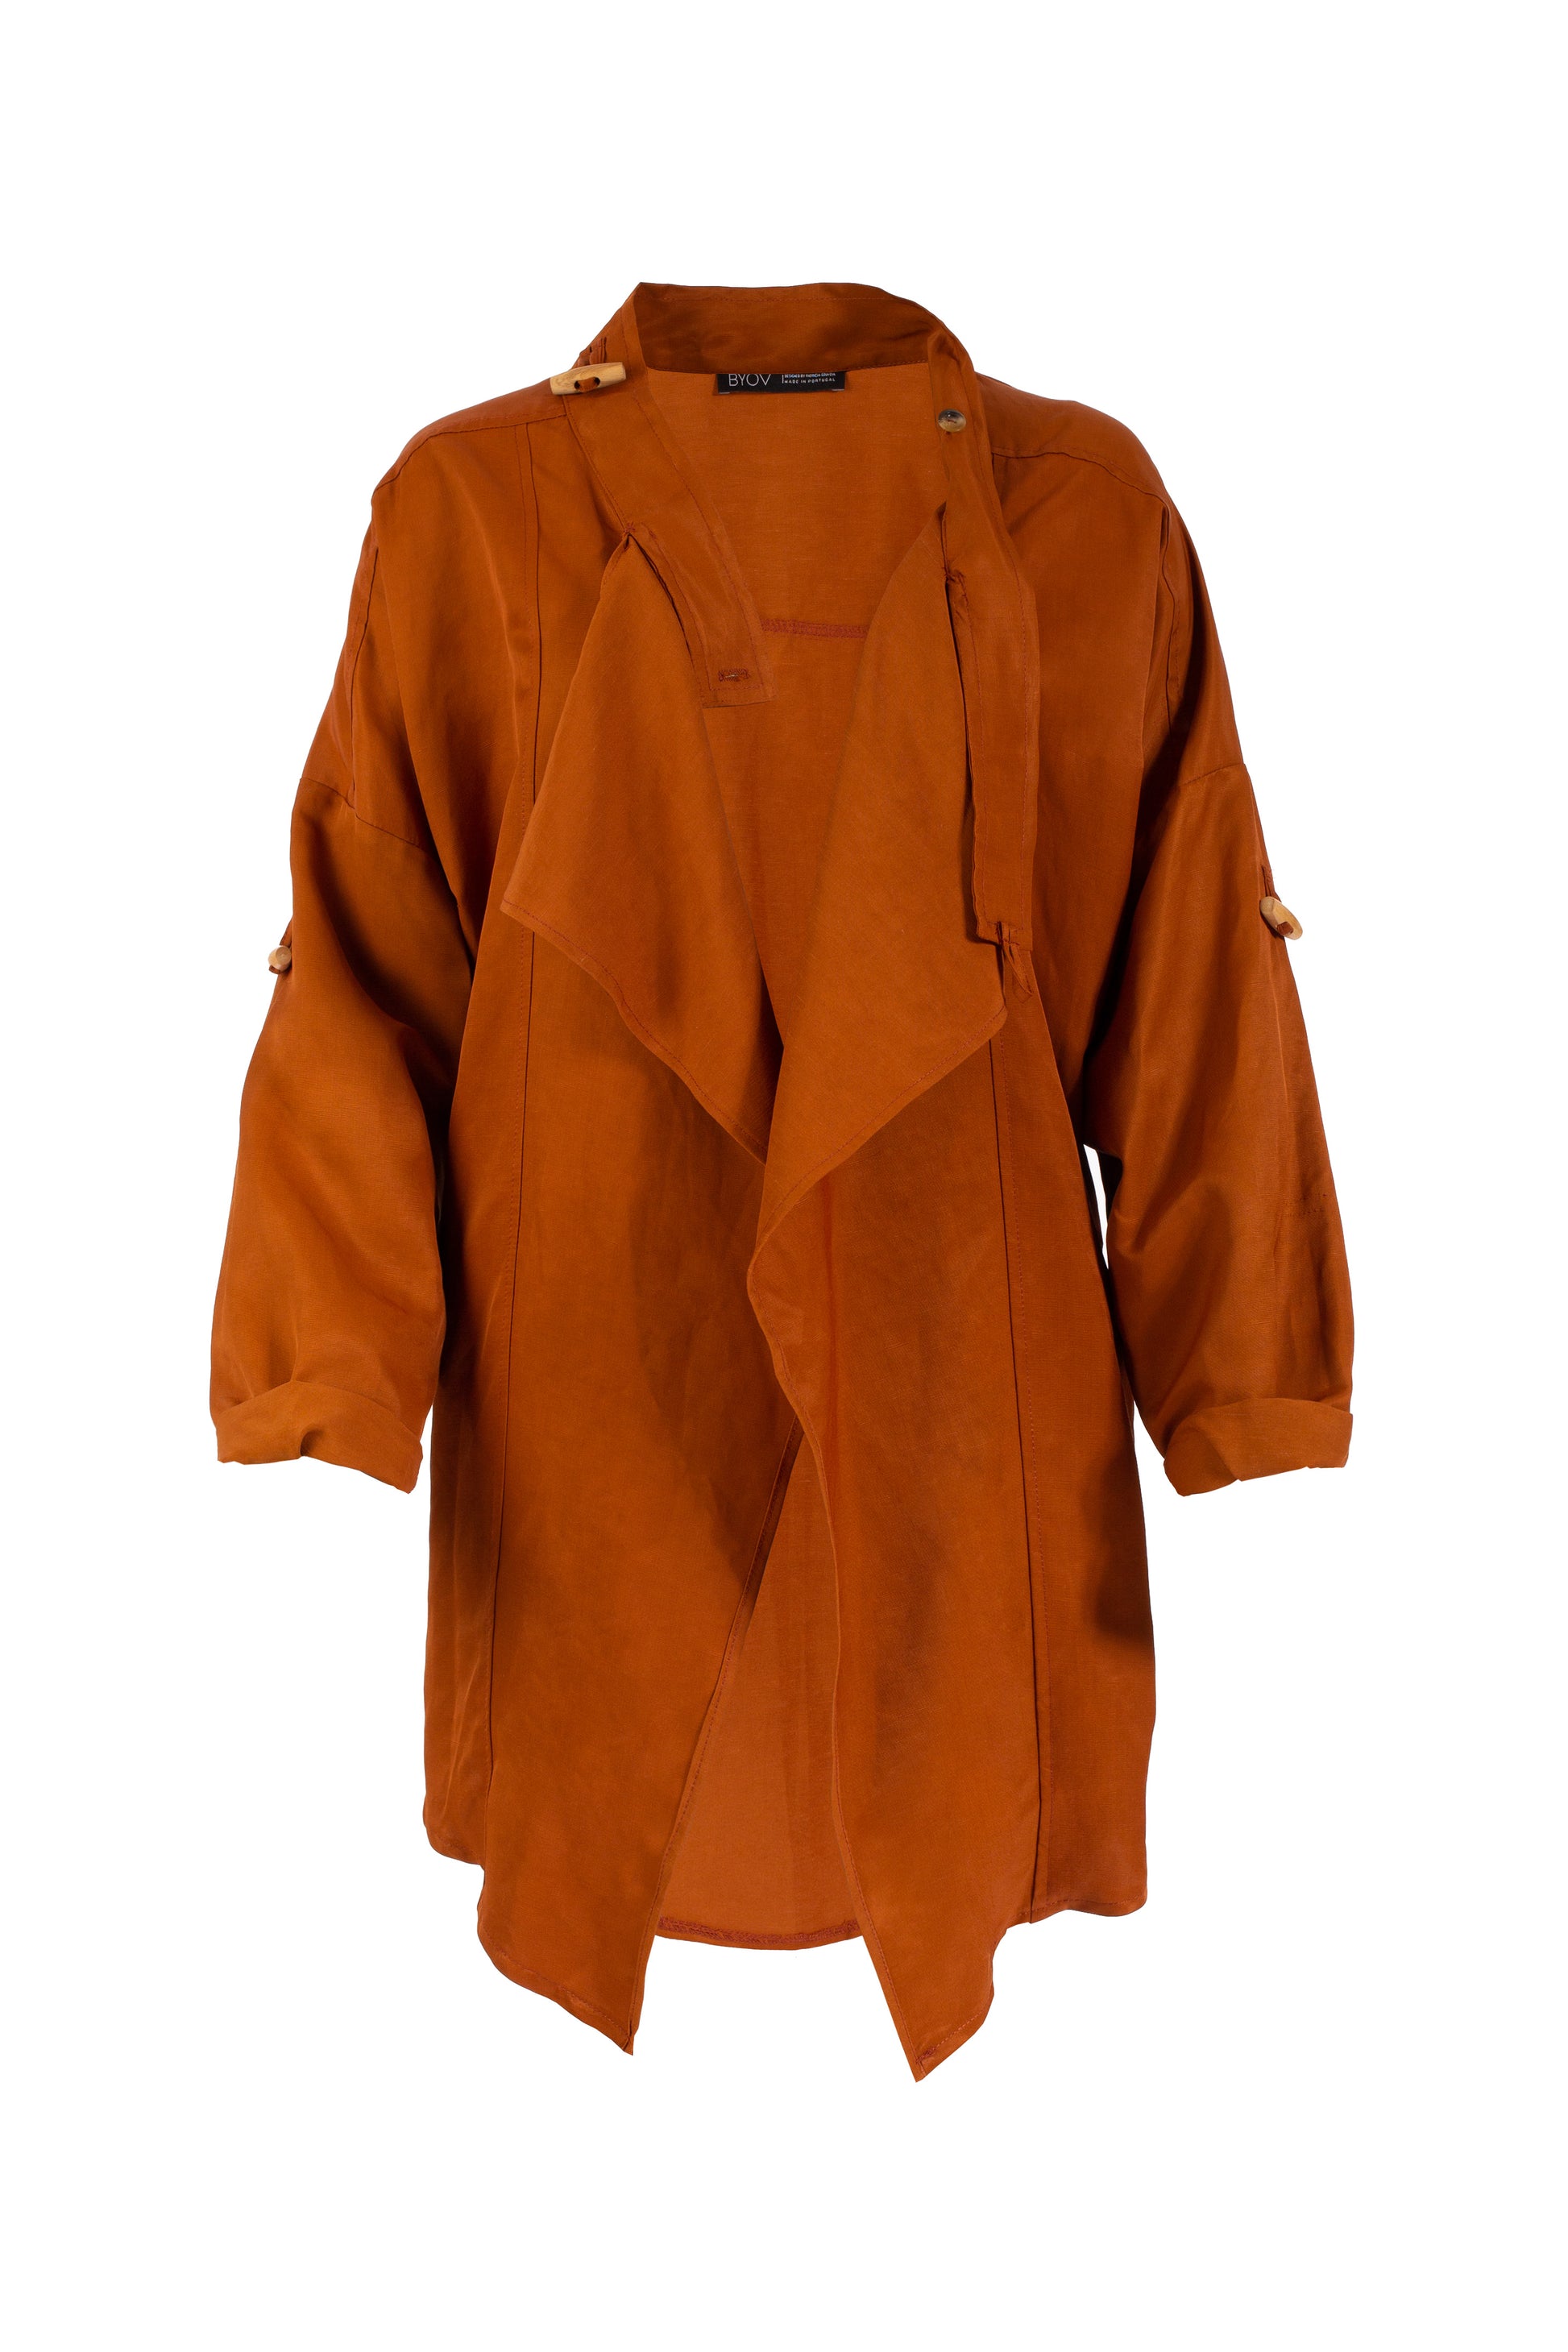 9756 - BENGUELA - TERRACOTTA TRENCH -BYOU by Patricia Gouveia